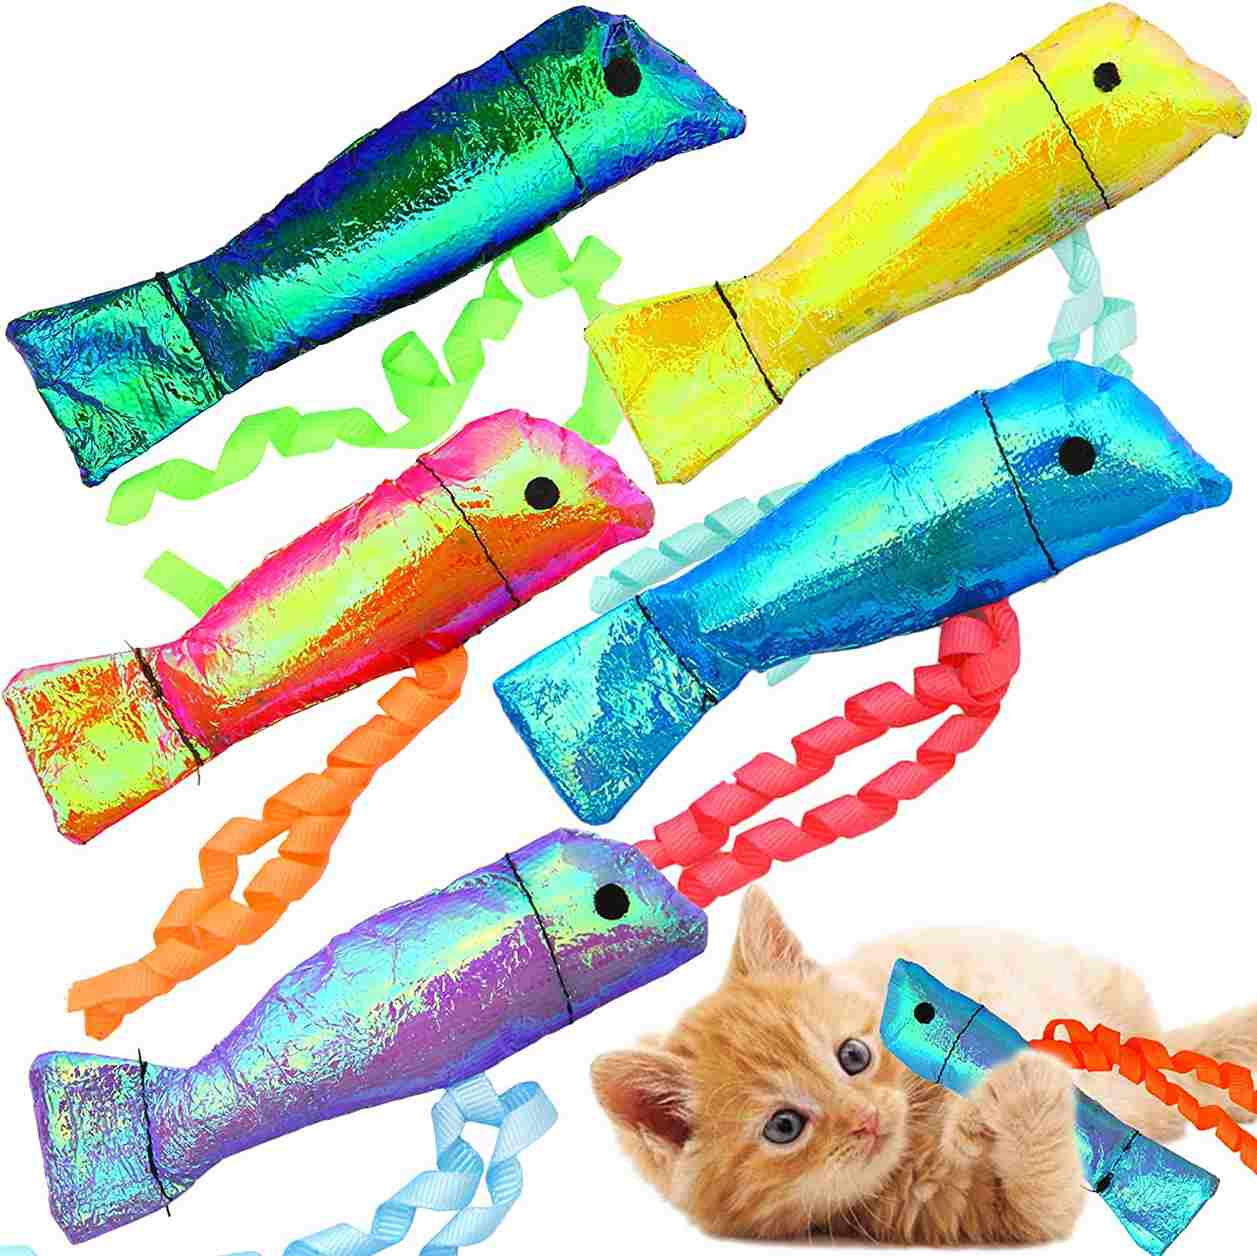 Youngever 15 Pack Crinkle Catnip Cat Toys, Cat Interactive Toys, Catnip Kitten Toys, Crinkle Catnip Fish for Cat, Puppy, Kitty, Kitten, 15 Assorted Colors